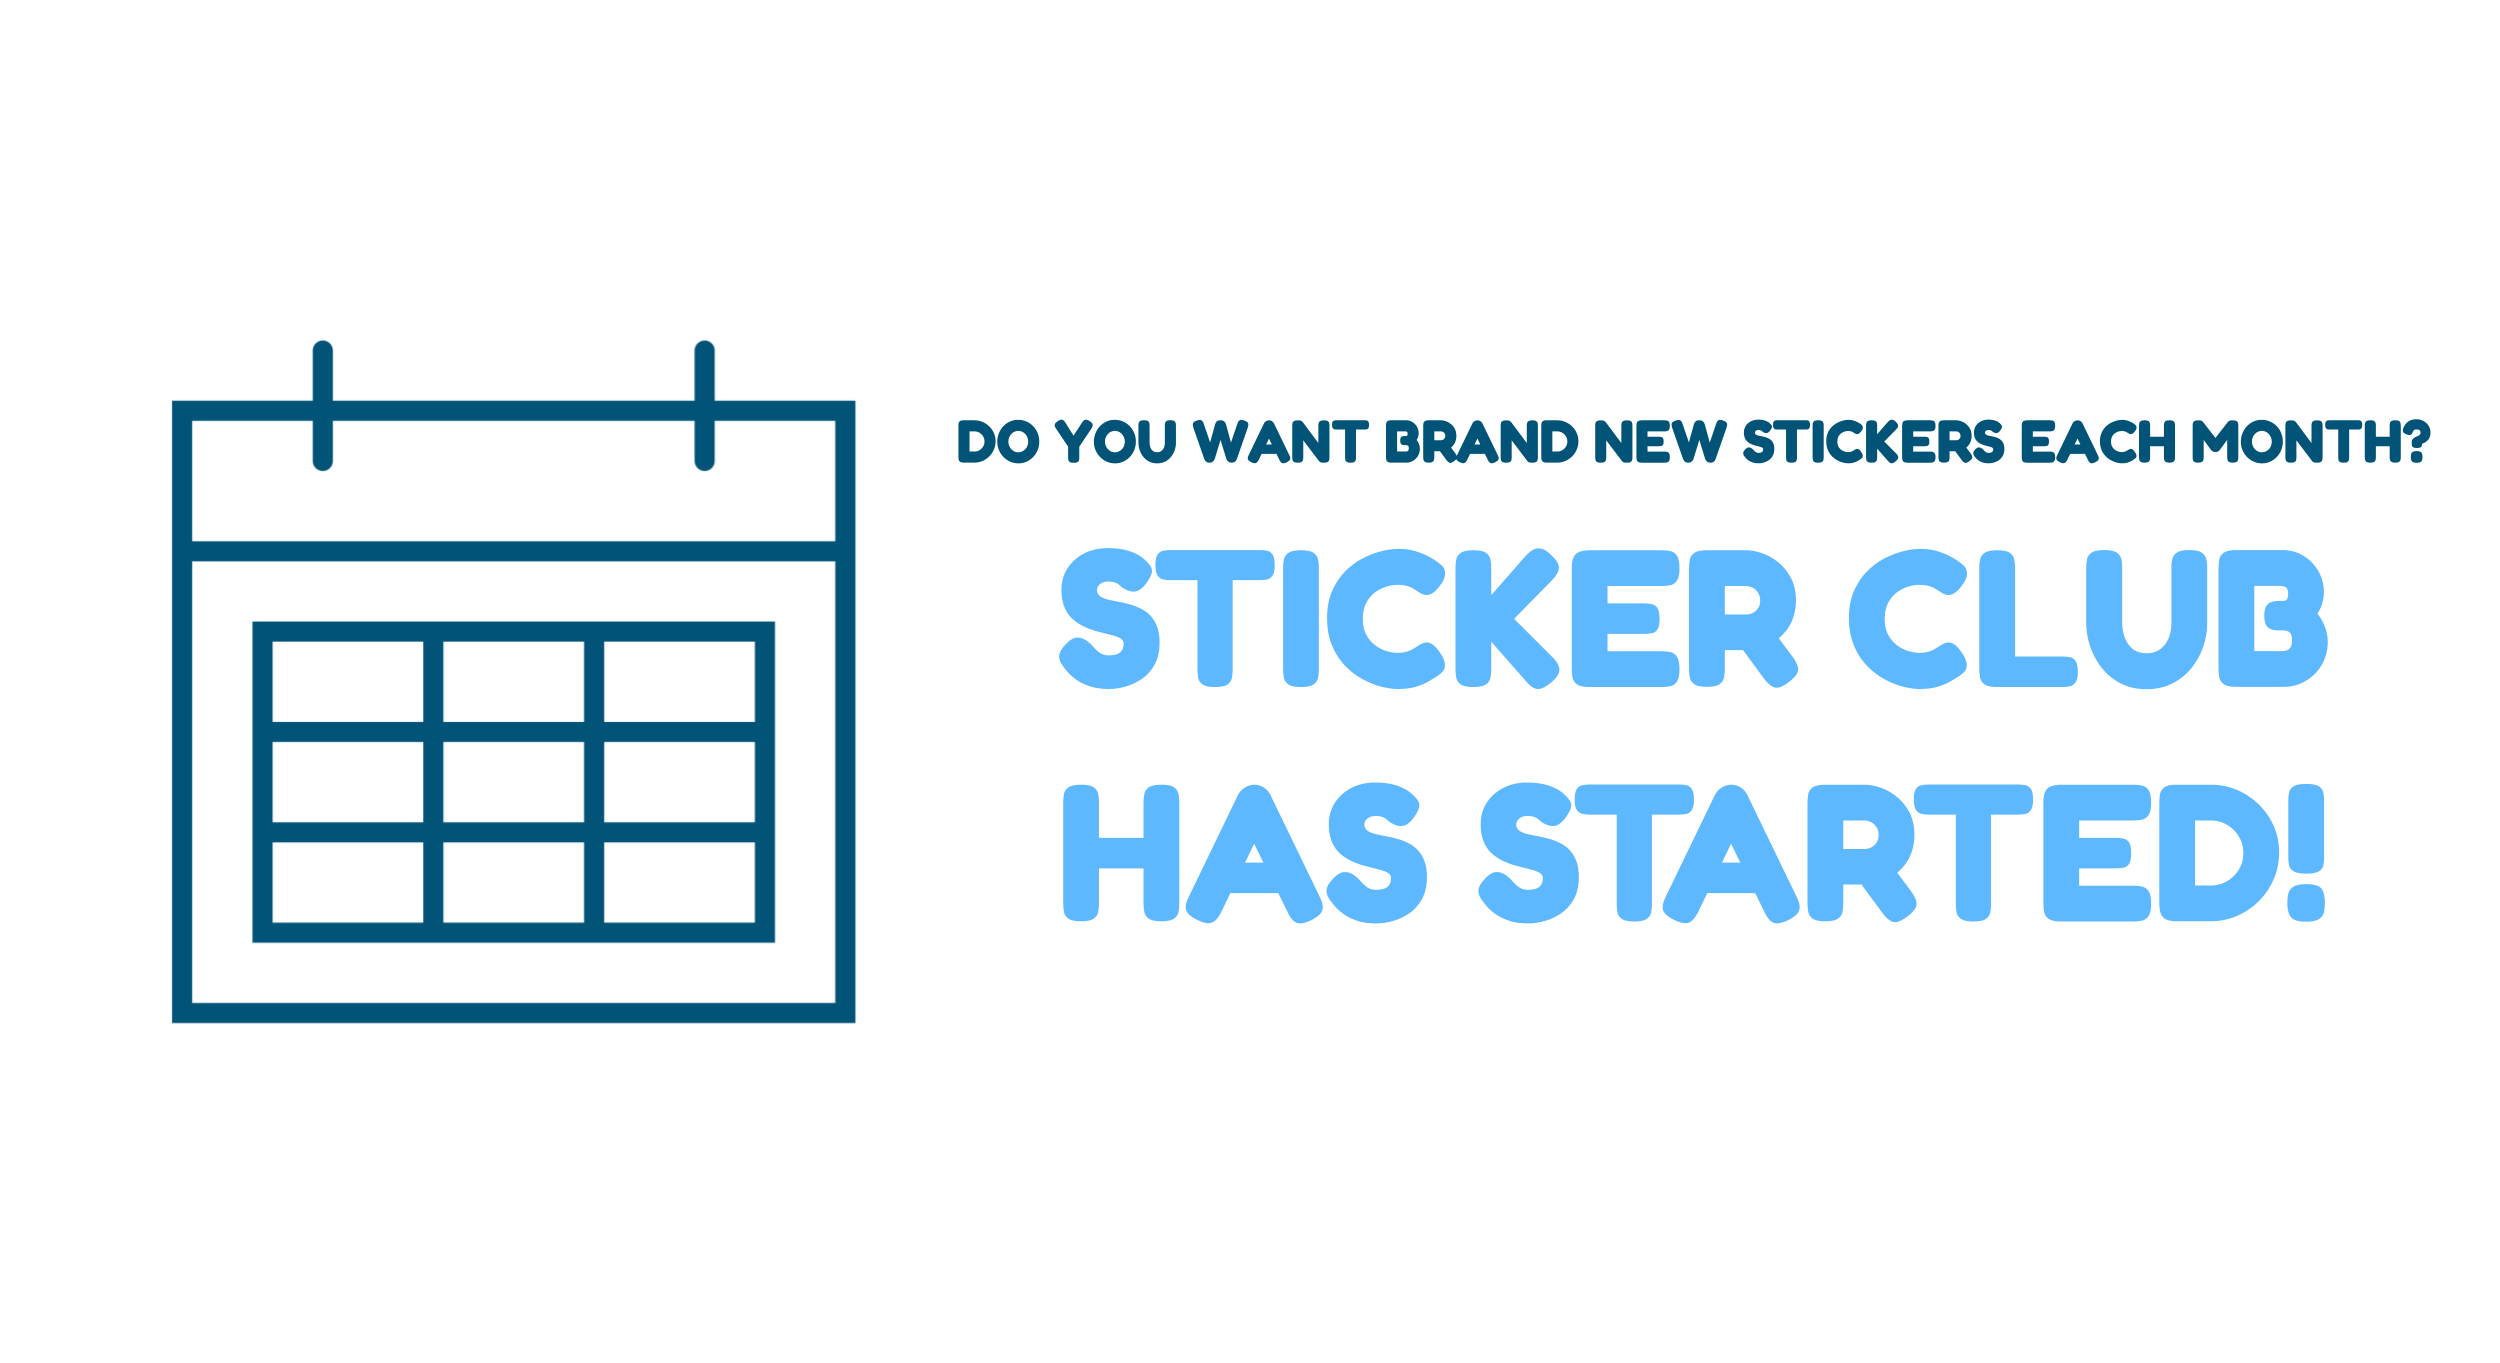 Get new stickers EVERY MONTH with the monthly sticker club!